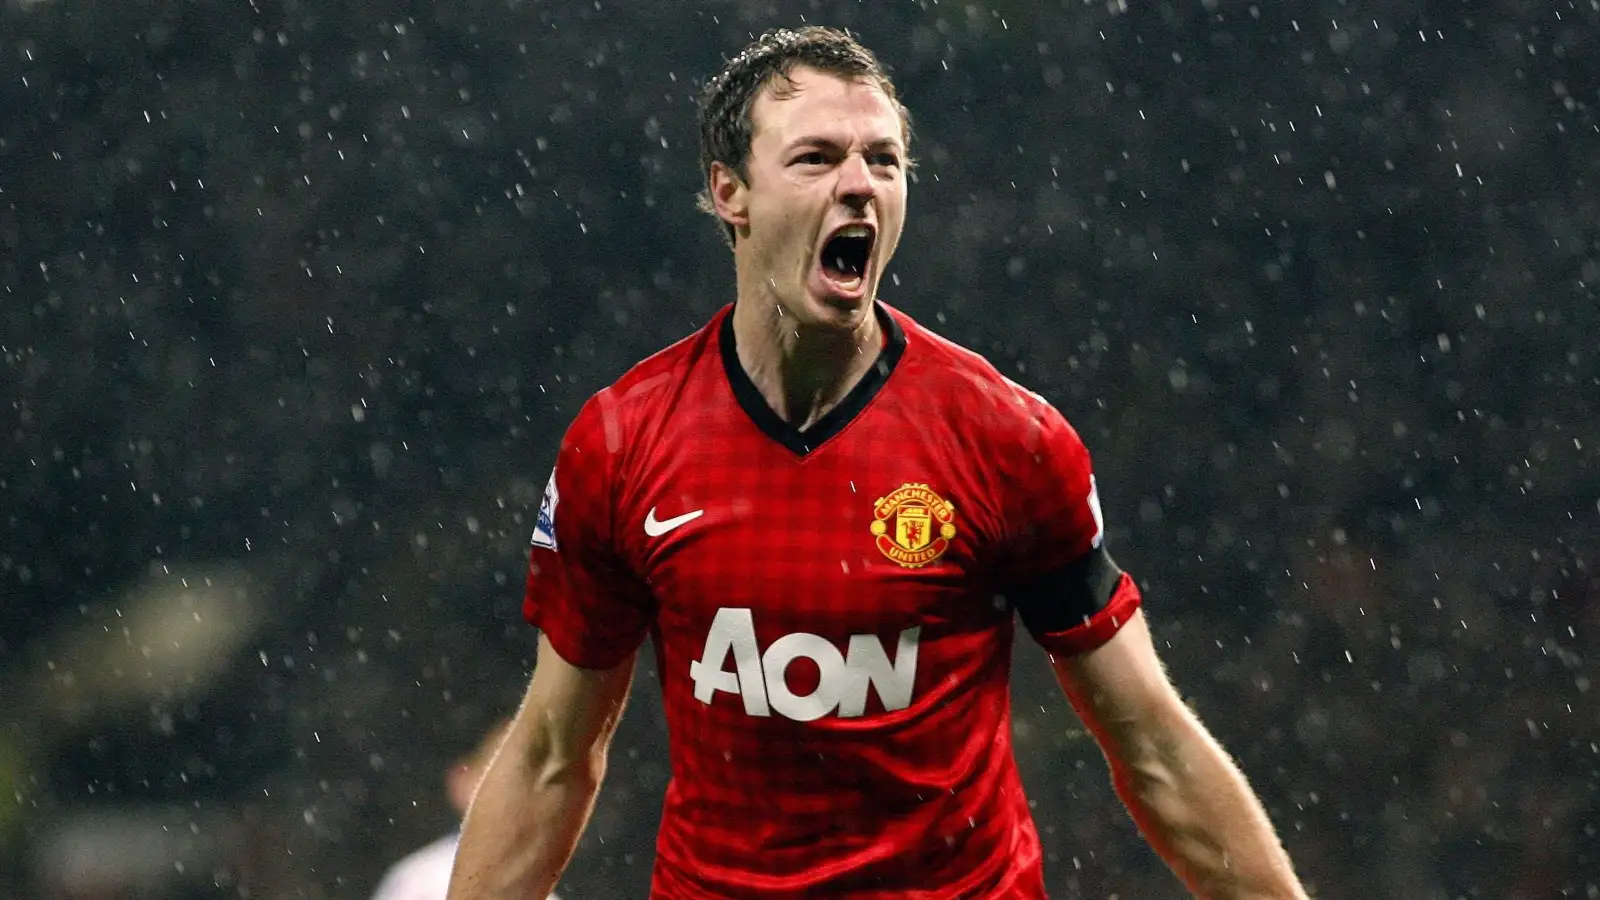 Jonny Evans next: Ranking the 7 players who had a second spell at Man Utd